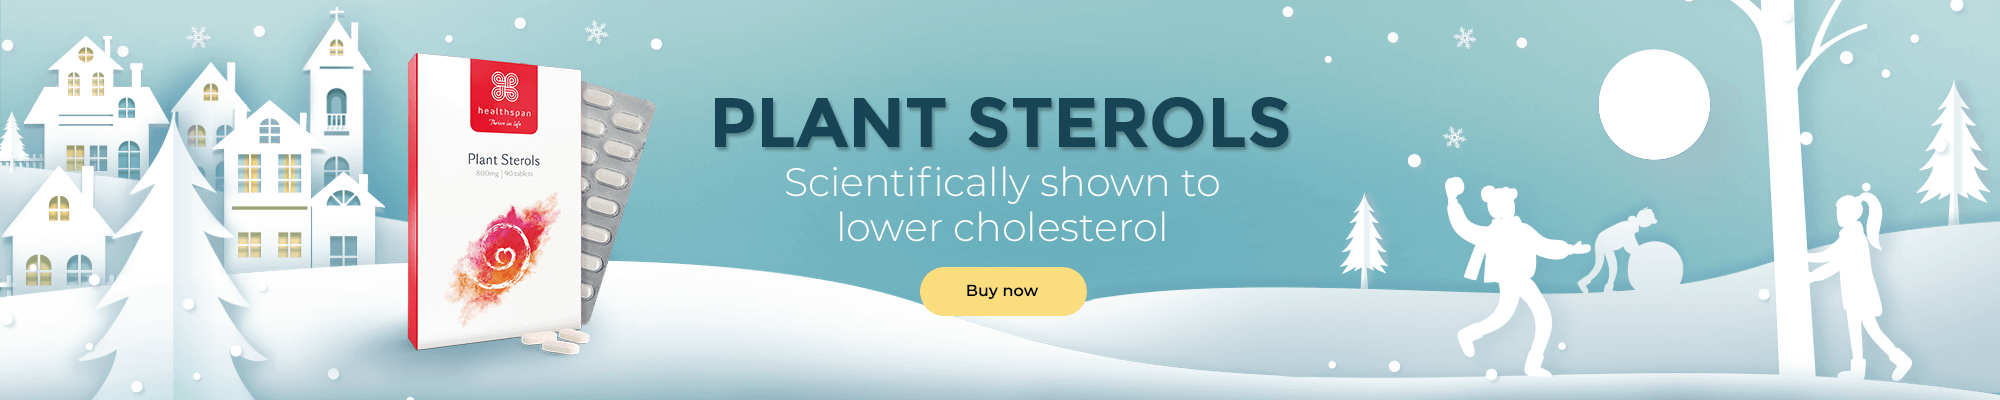 Plant Sterols - scientifically shown to lo lower cholesterol. Buy now